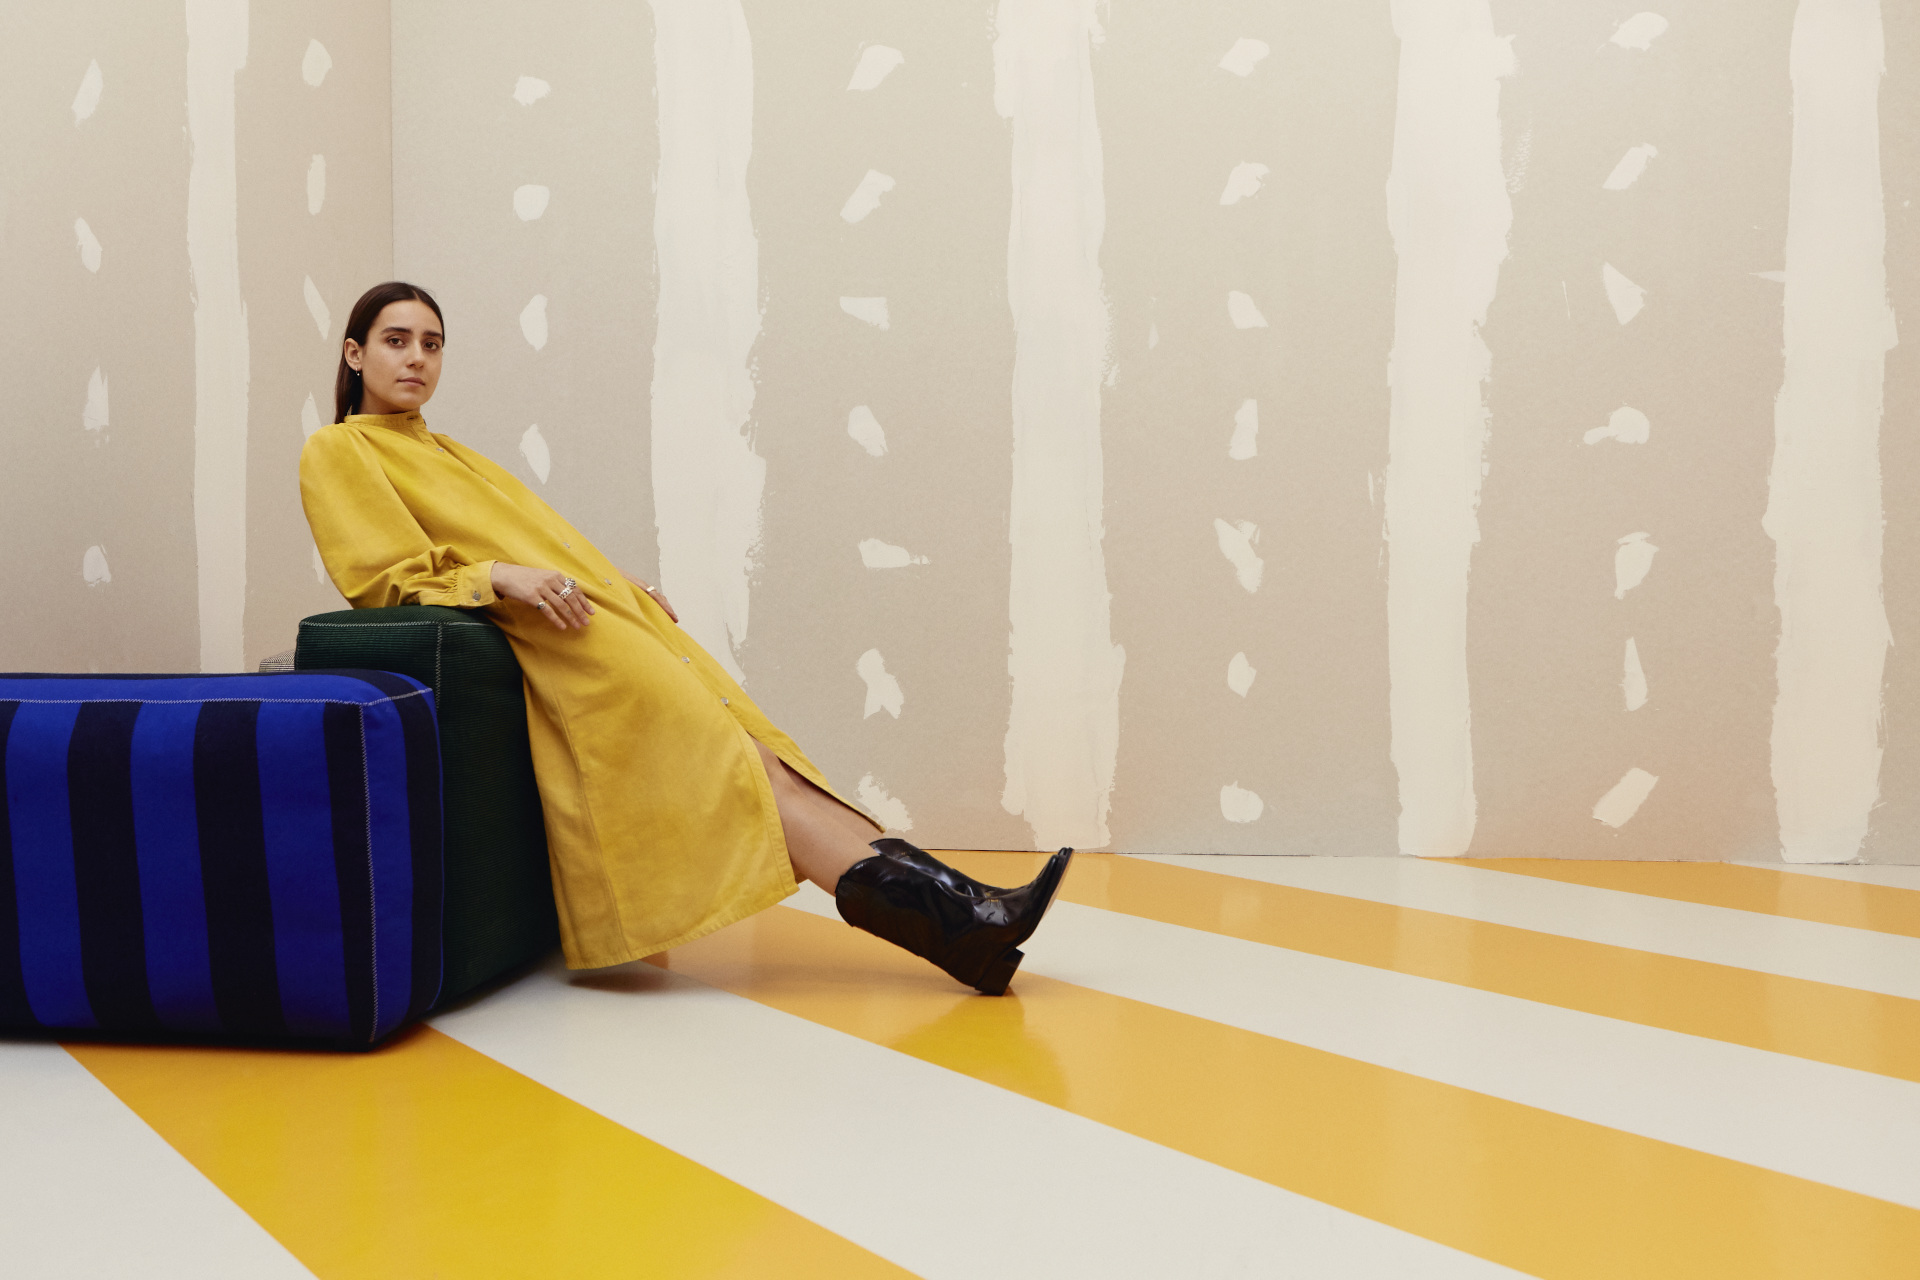 Woman in yellow dress reclining on blue stool, over yellow striped floor and beige striped wall